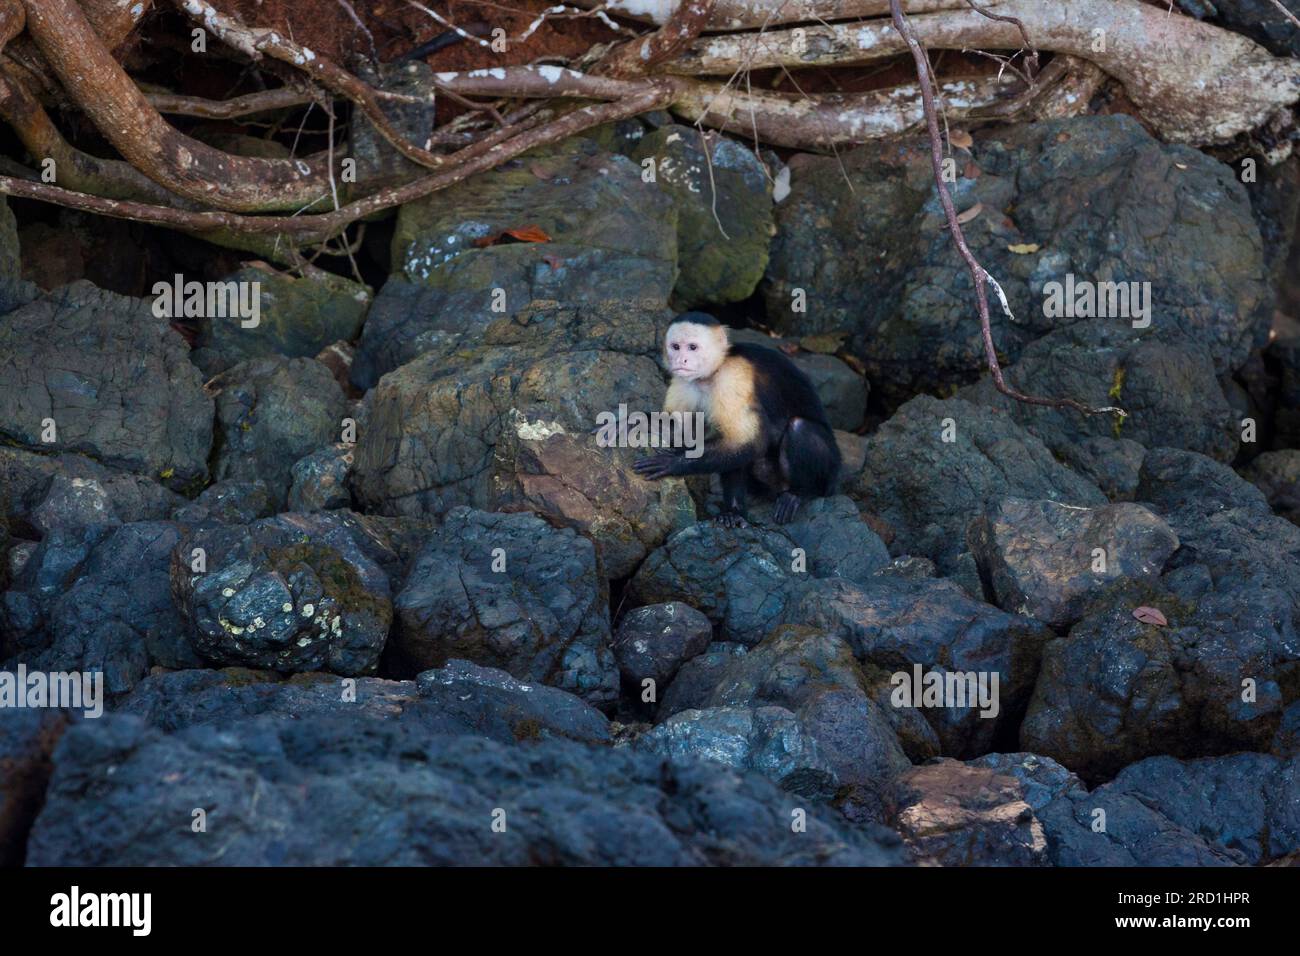 White-faced Capuchin, Cebus imitator, on a rock close to the coast at Coiba National Park, Pacific ocean, Veraguas province, Republic of Panama. Stock Photo